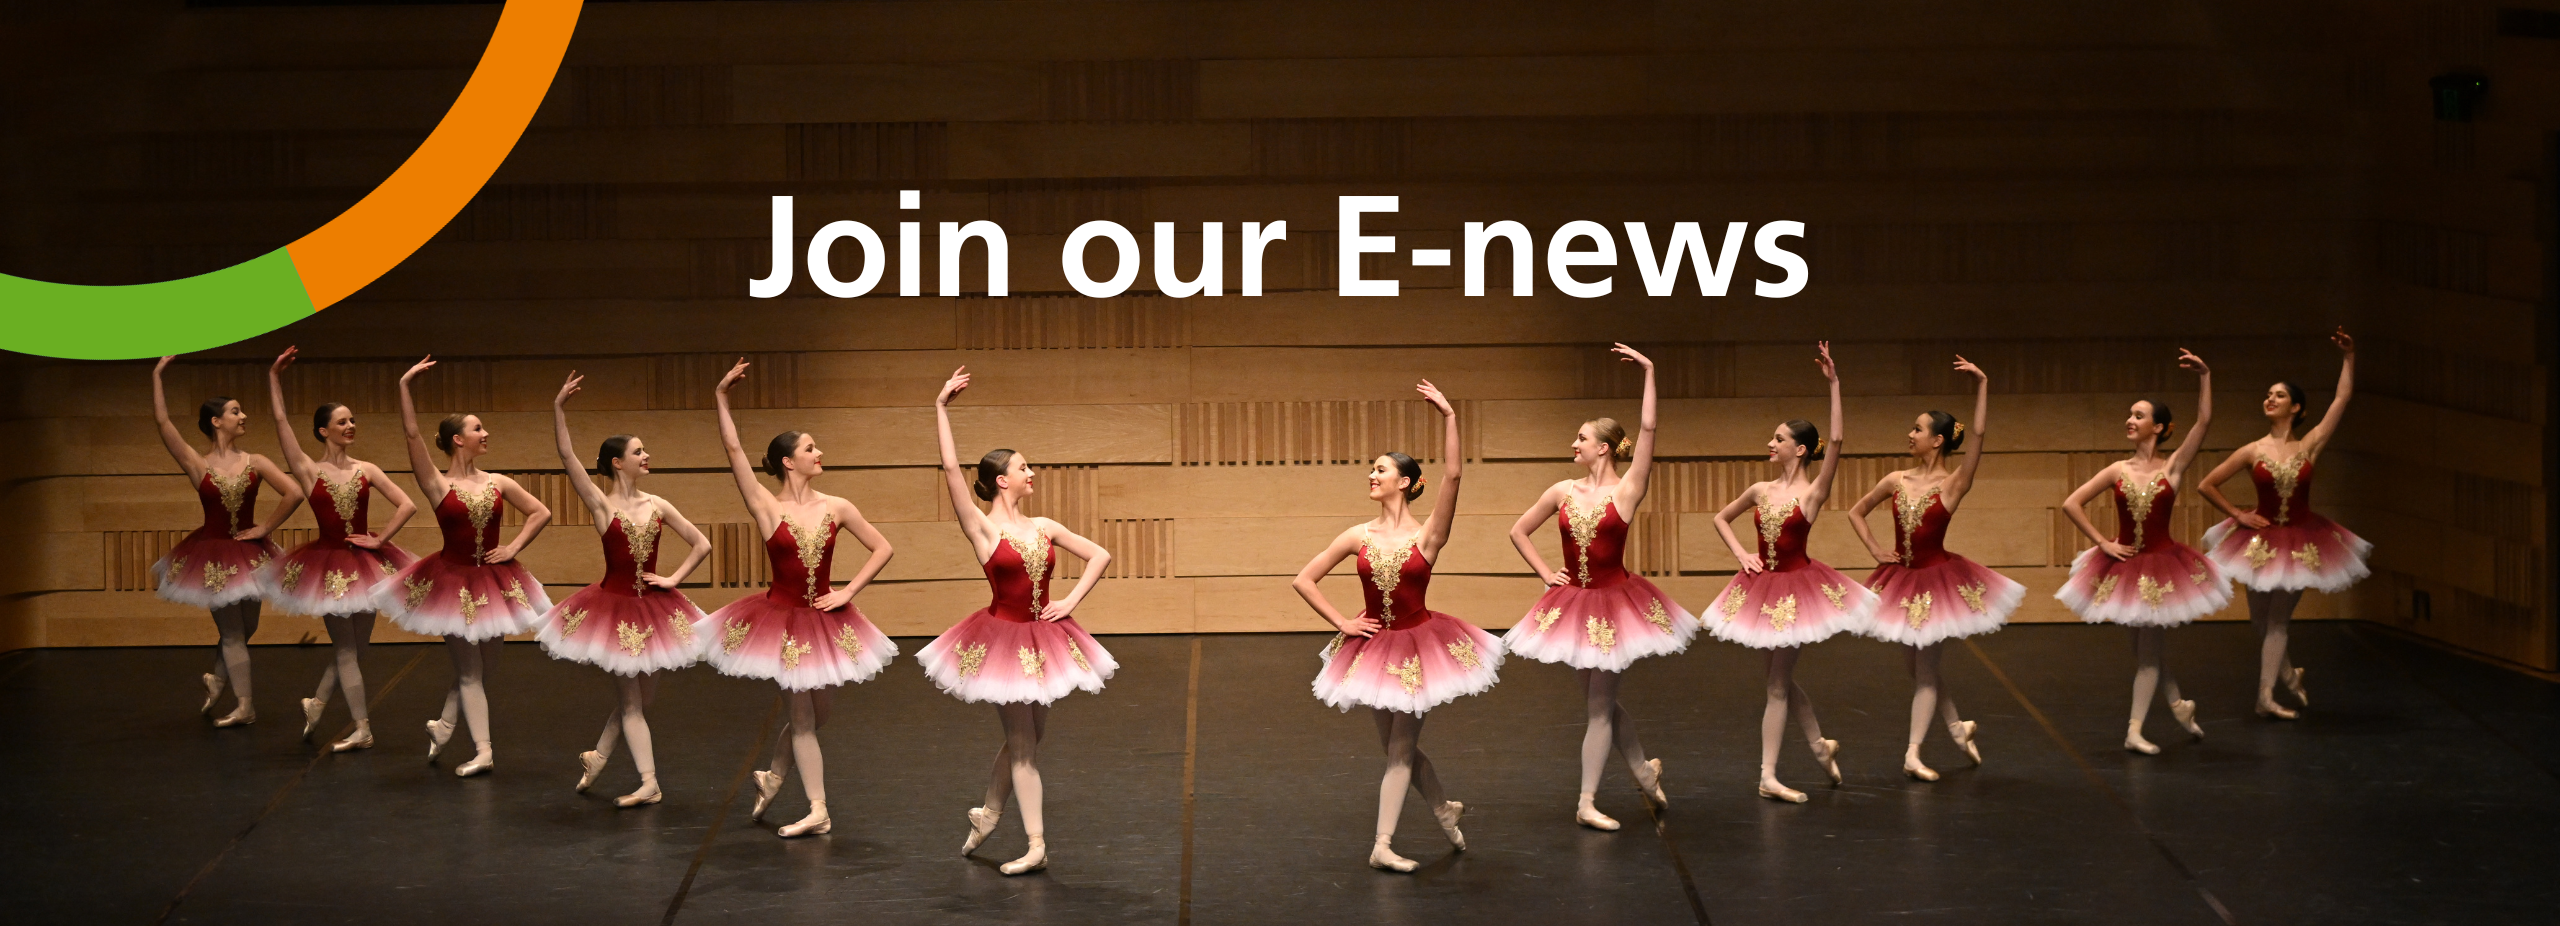 Join our E-news